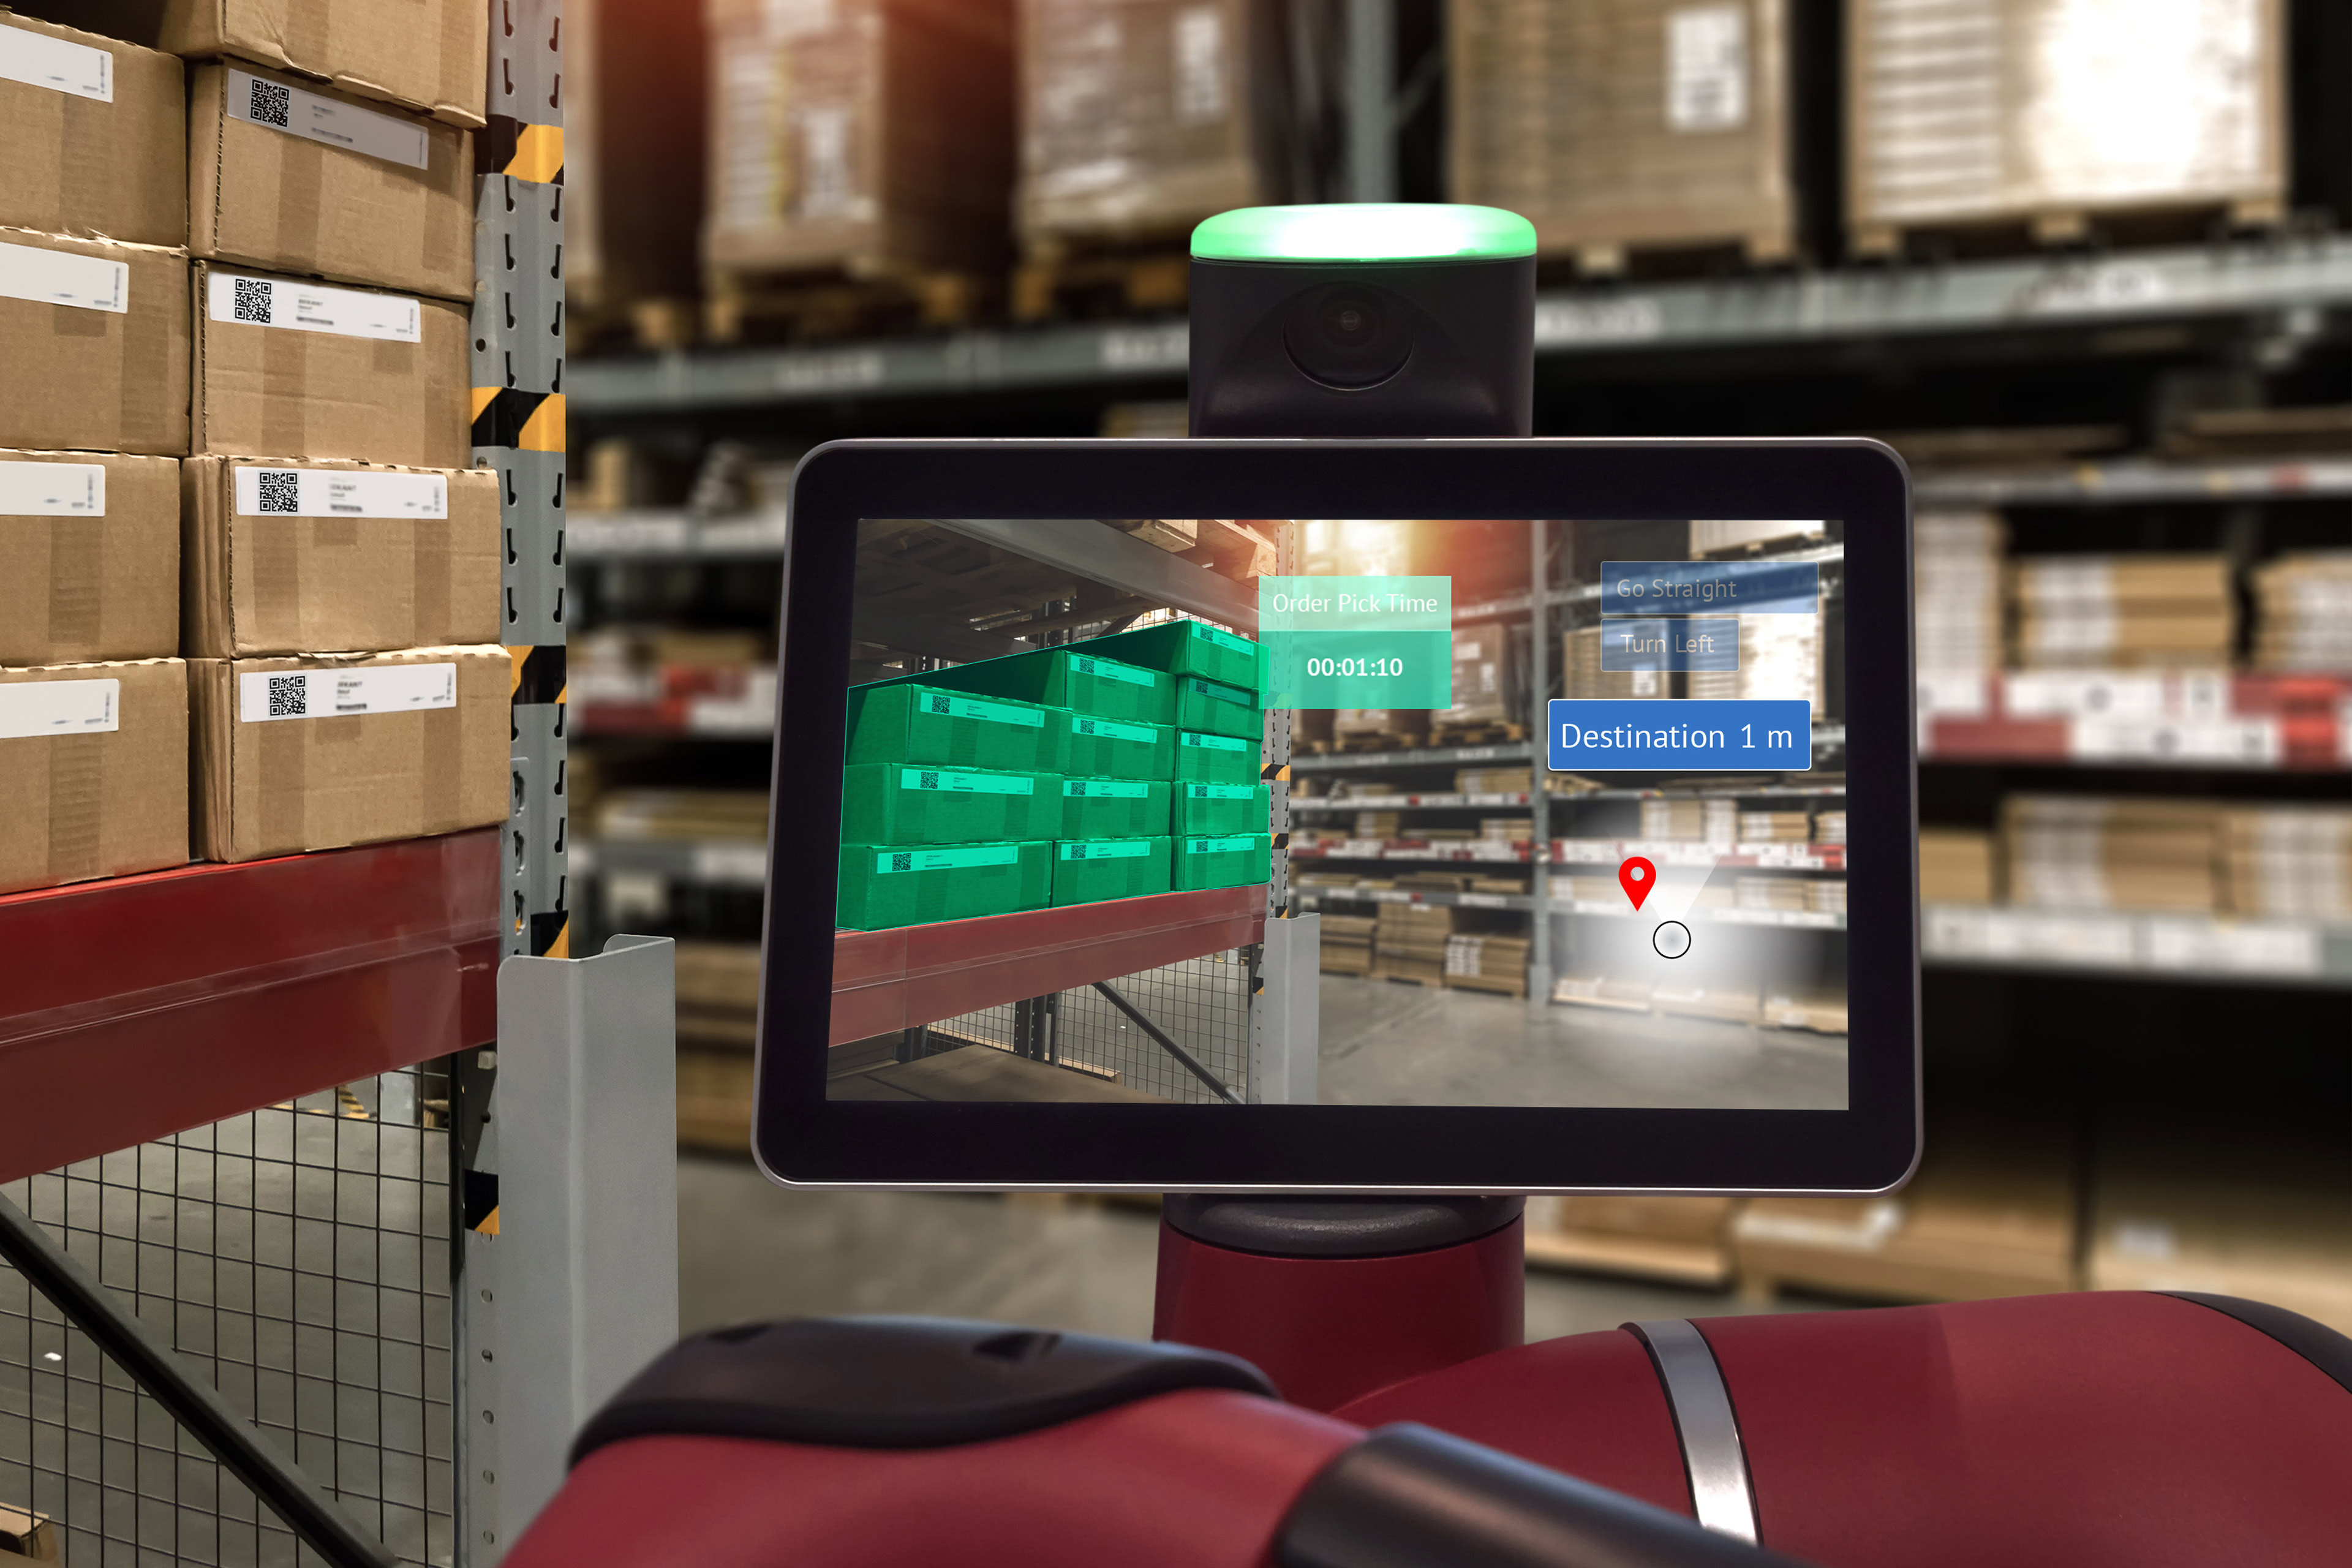 Industrial 4.0 , Augmented reality and smart logistic concept. Robot adviser with AR application for check order pick time in smart factory industry warehouse.